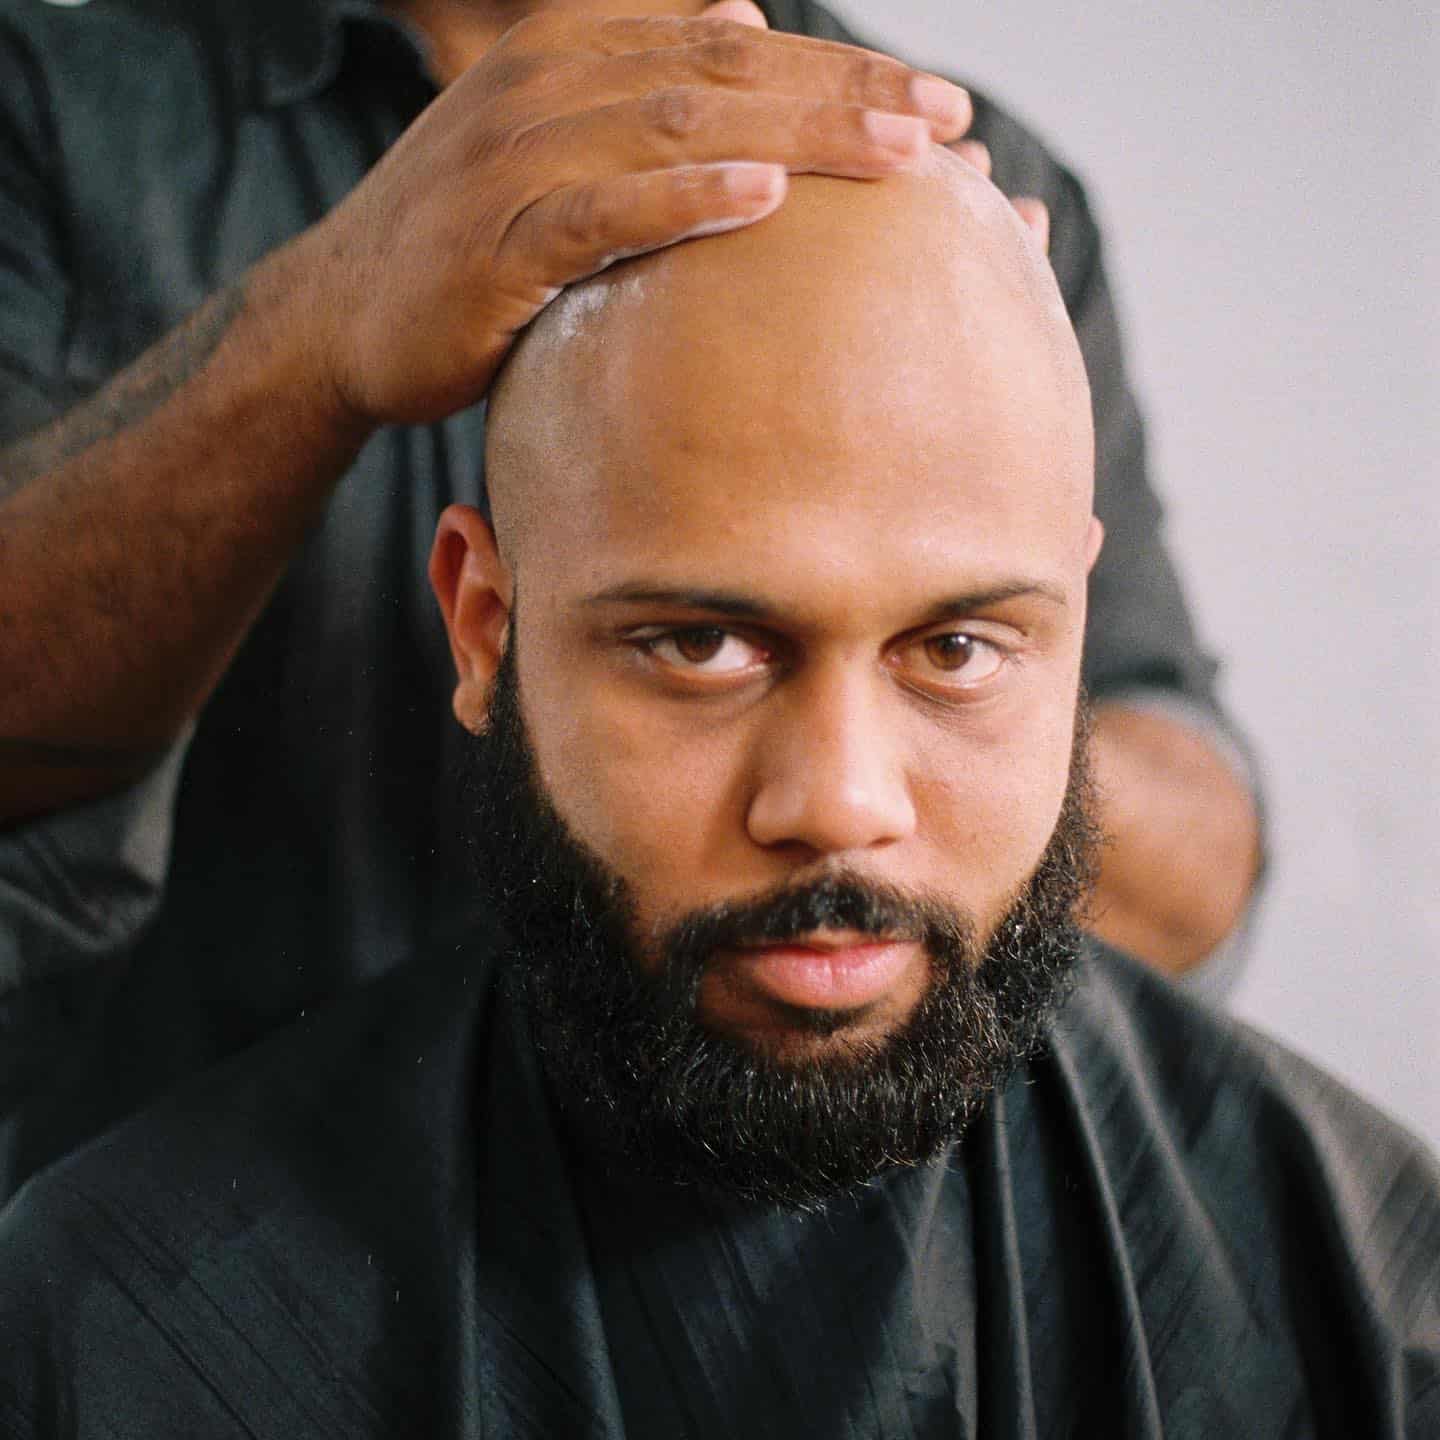 a barber applying cream to a shaved head